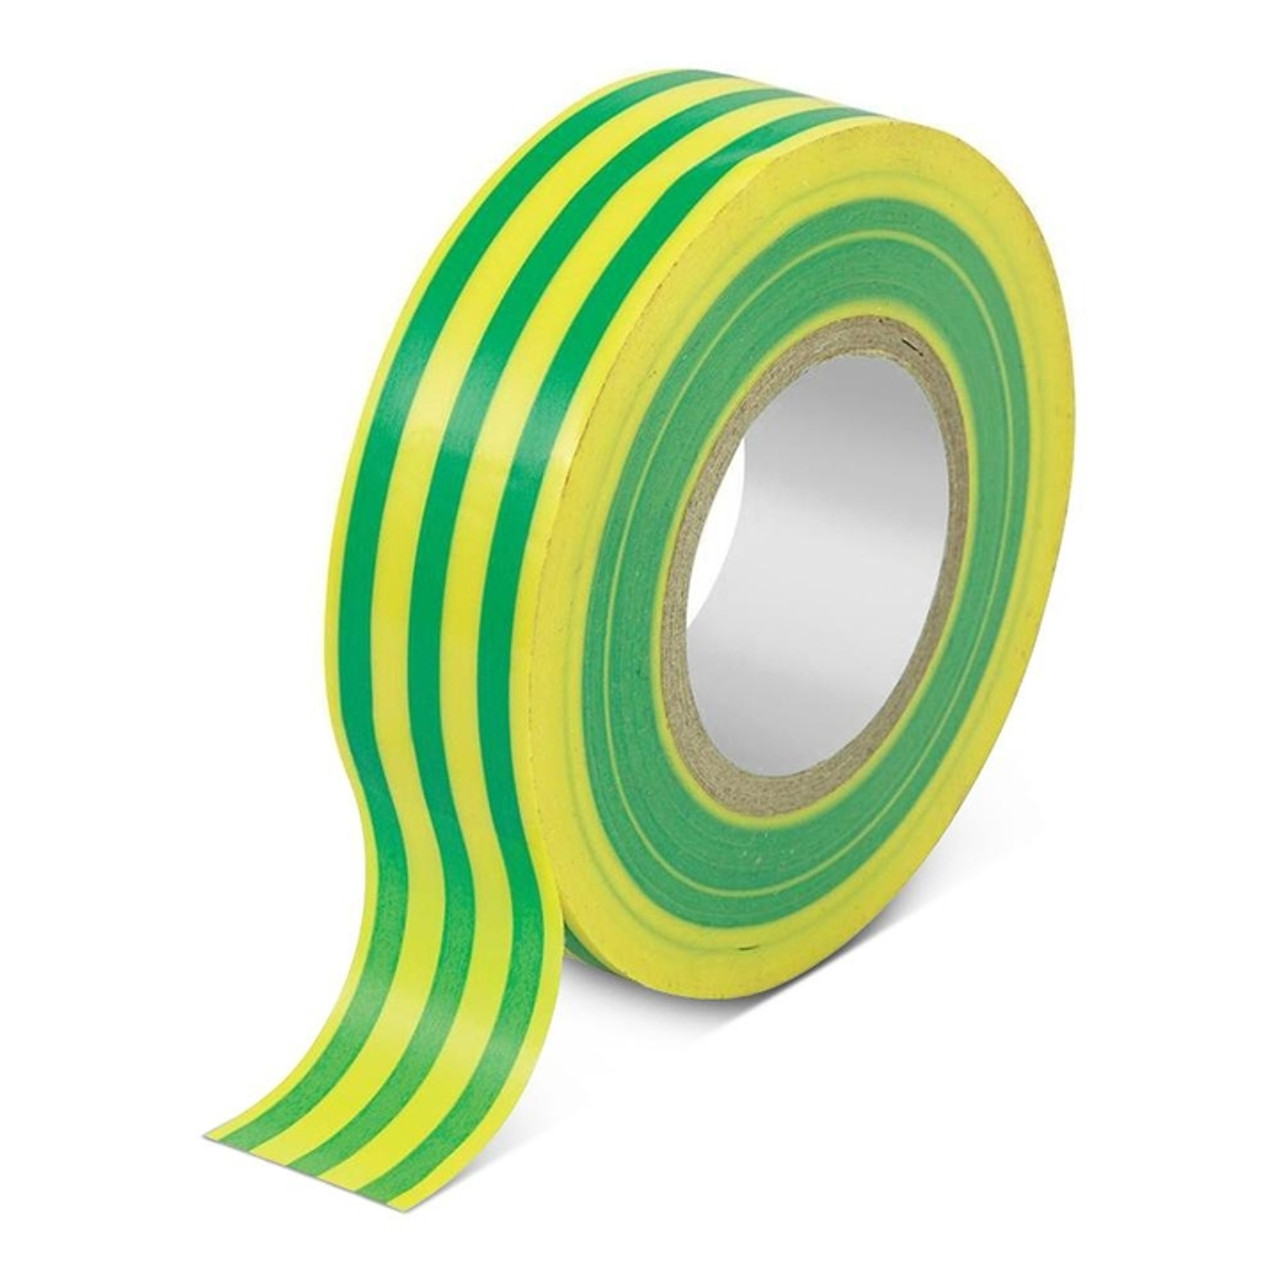 Insulation Tape 20M Blue  Pck 10 - Tape-Green/Yellow